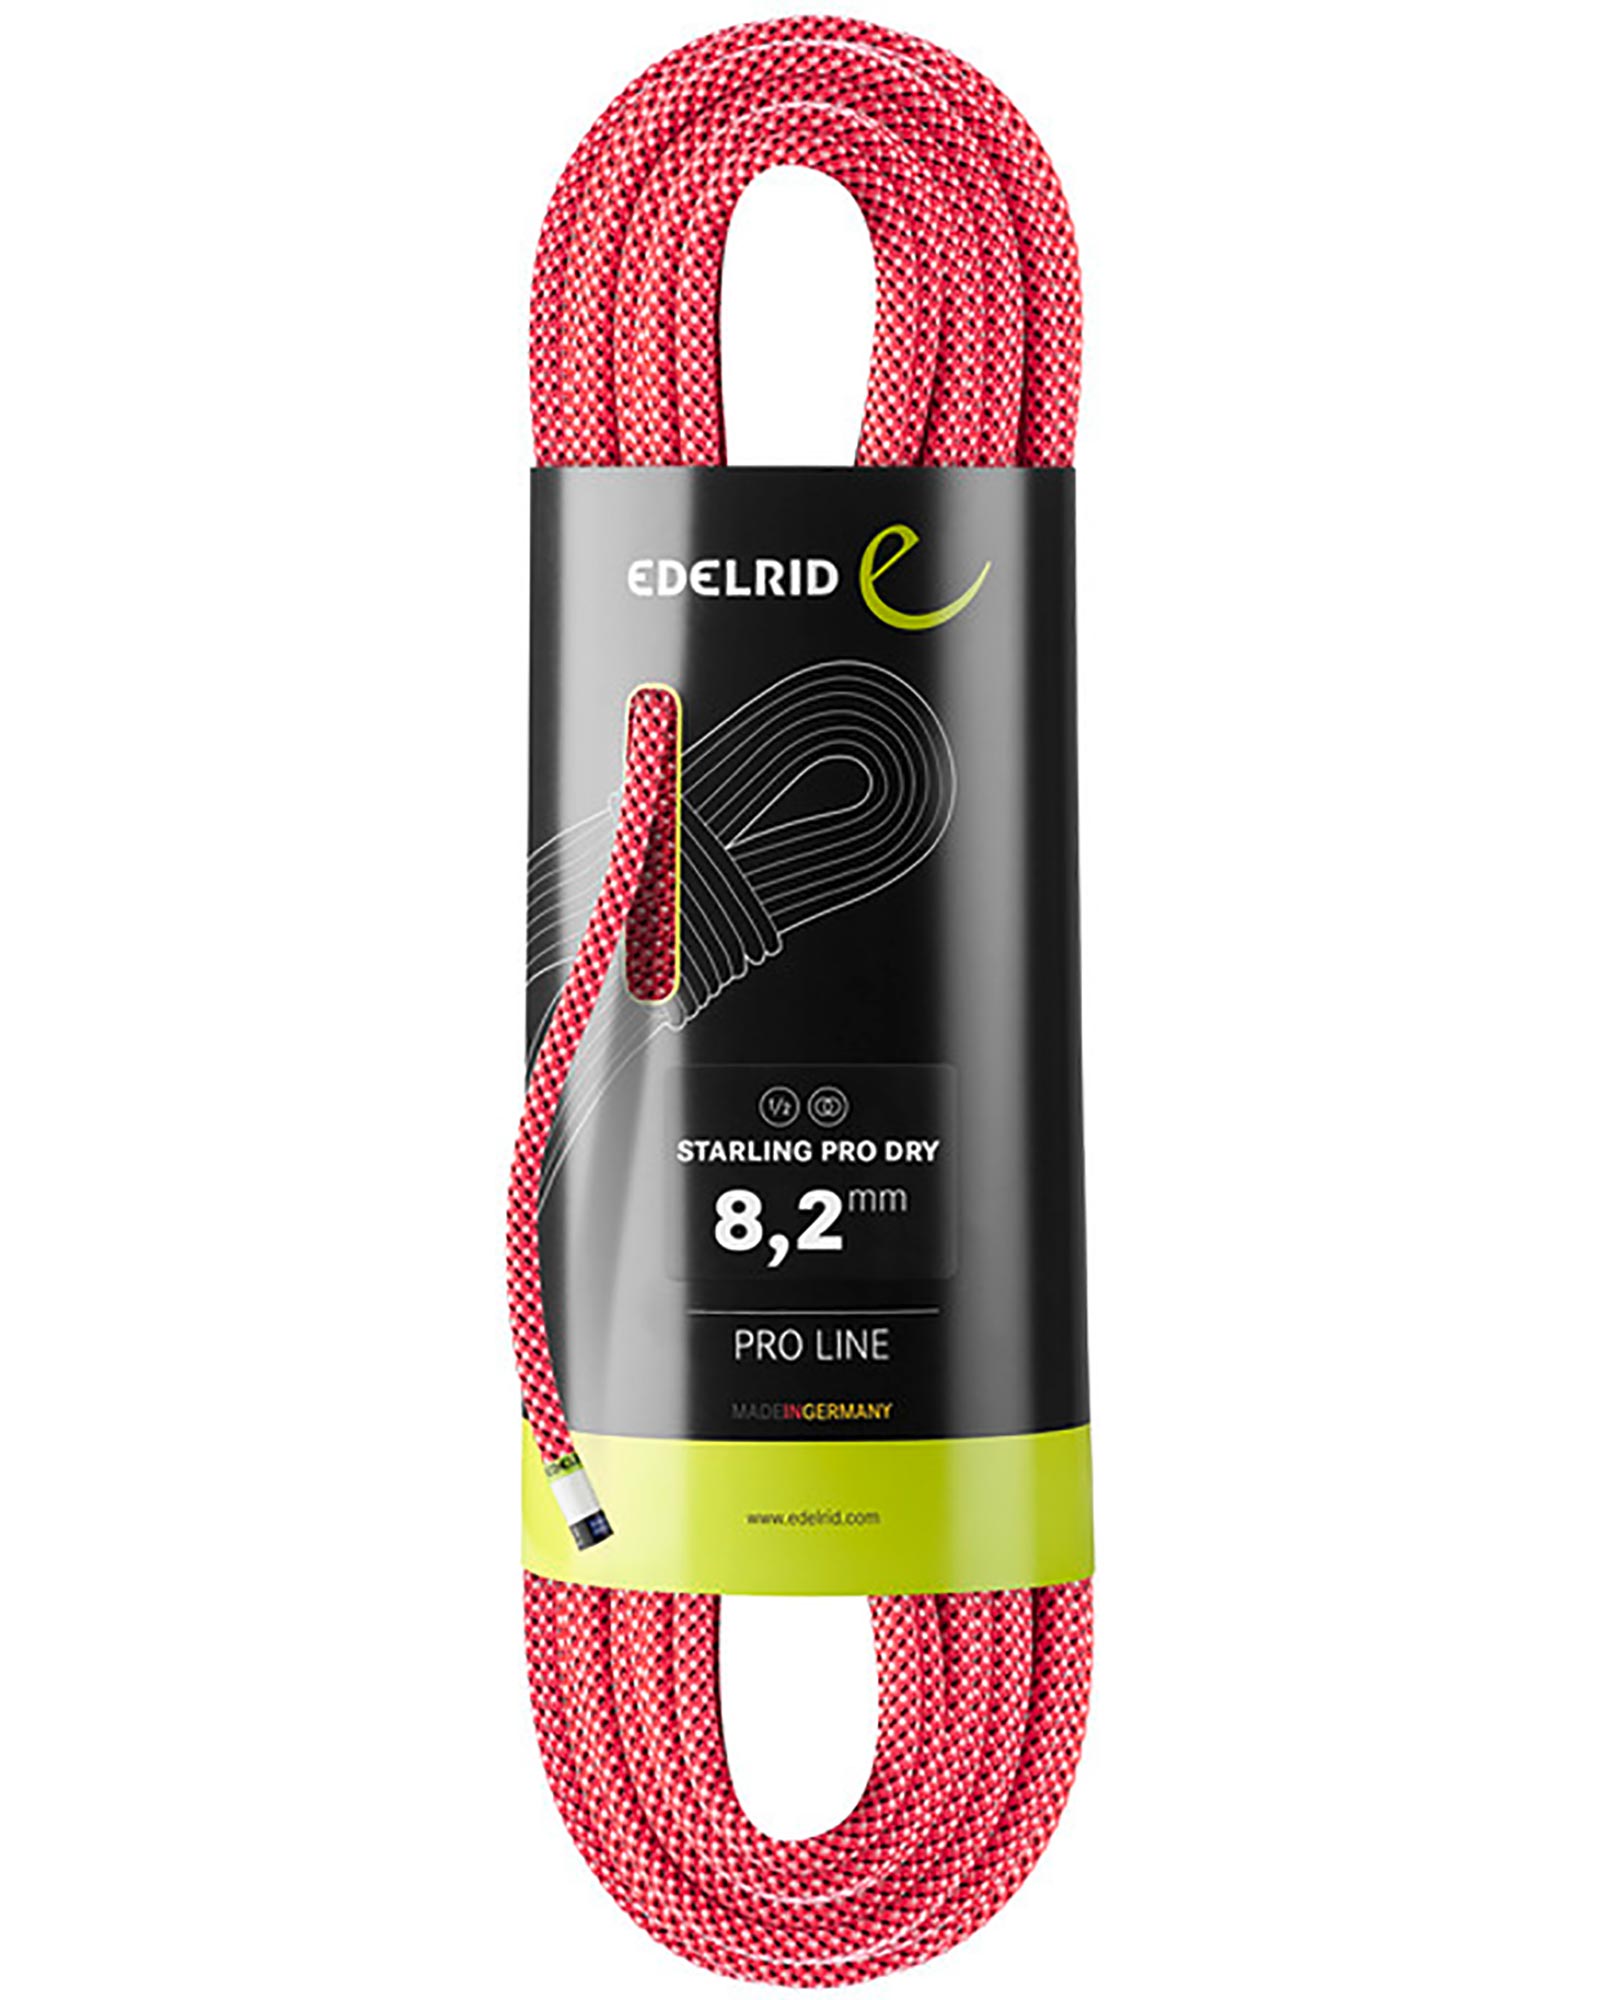 Edelrid Starling Pro Dry 8.2mm x 50m Rope 0